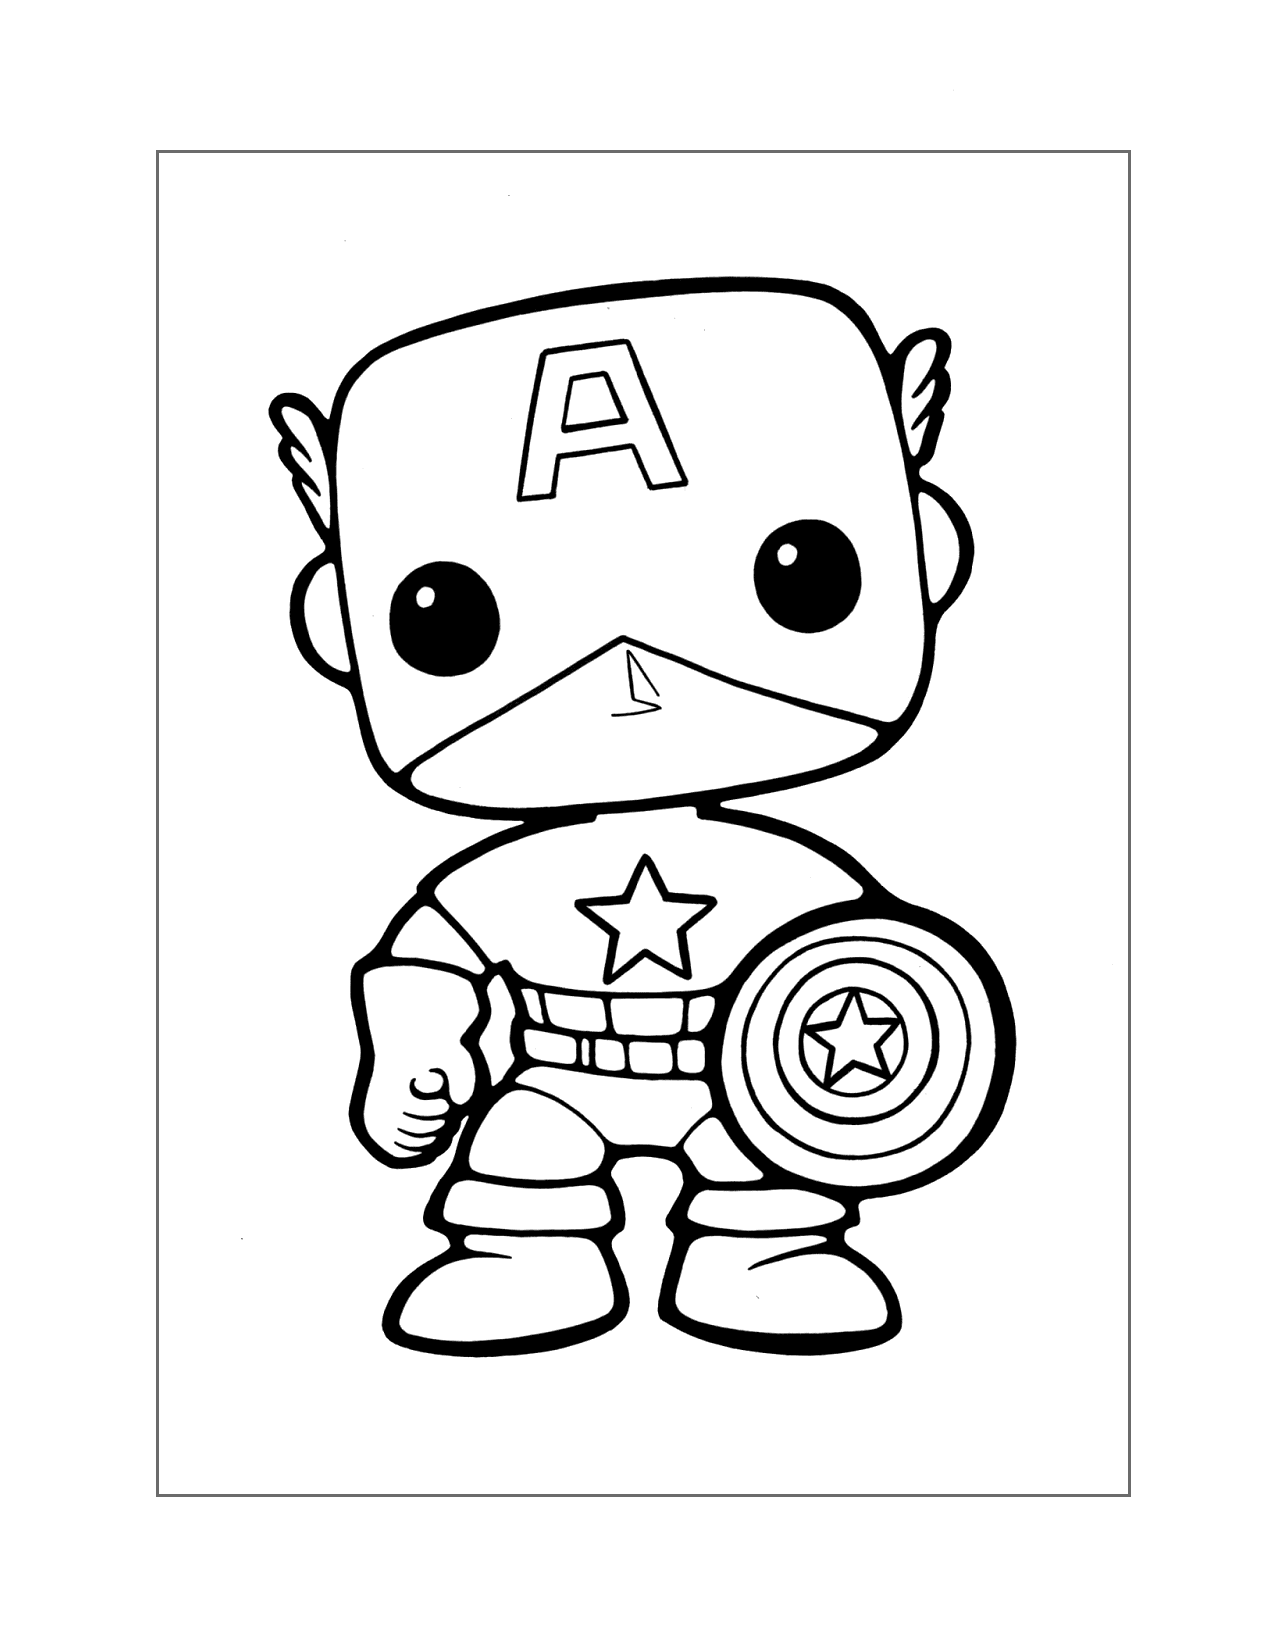 Funko Pop Coloring Pages ⋆ coloring.rocks! in 2022 | Superhero coloring,  Cute coloring pages, Marvel coloring